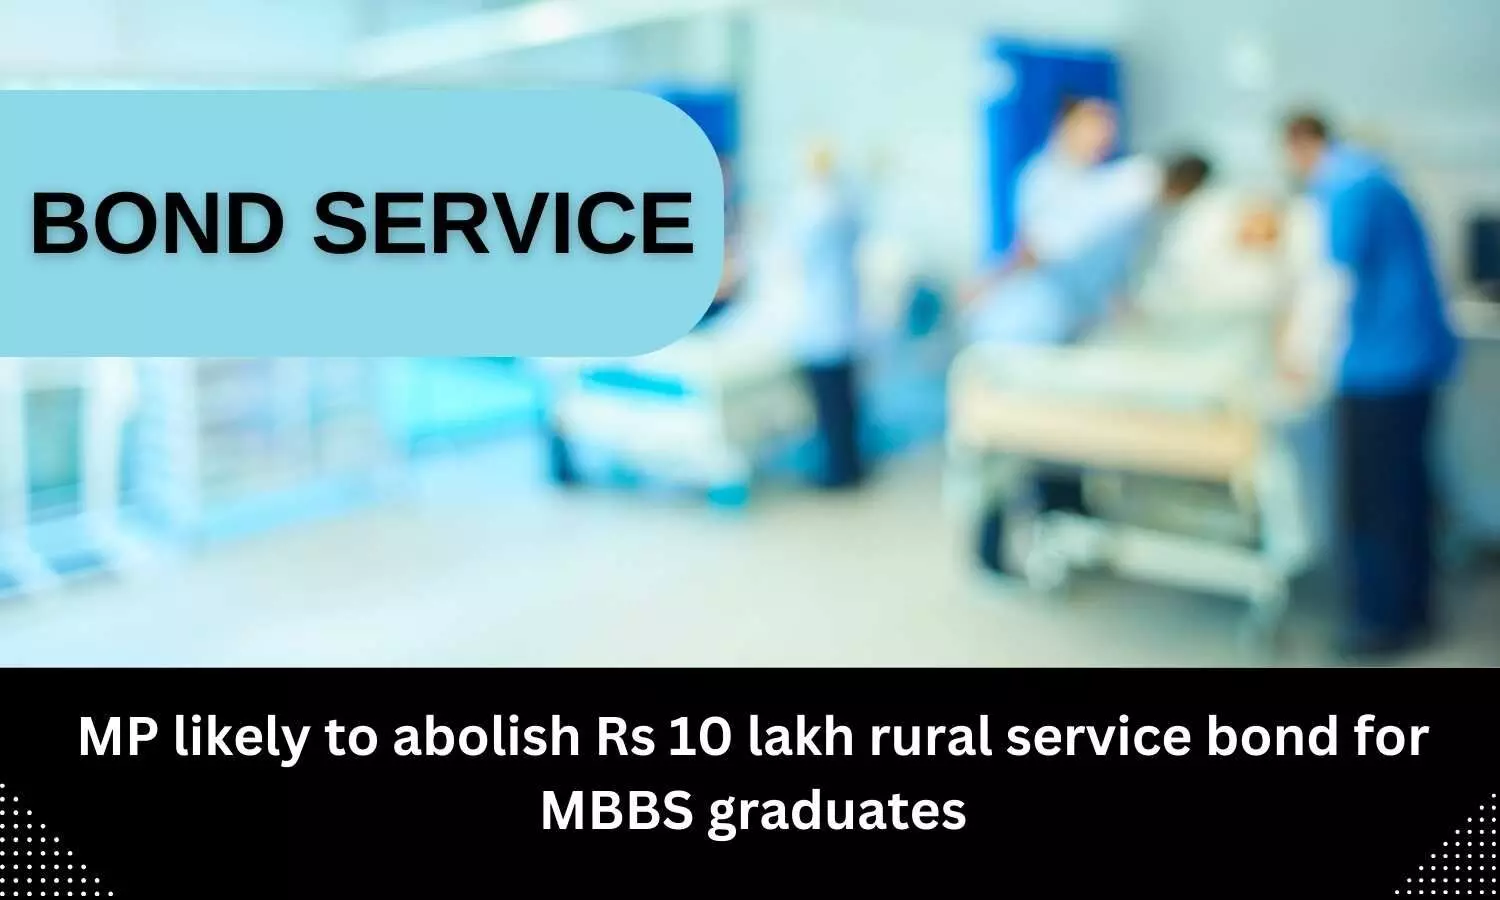 Relief to MBBS students, MP likely to abolish Rs 10 lakh rural service bond